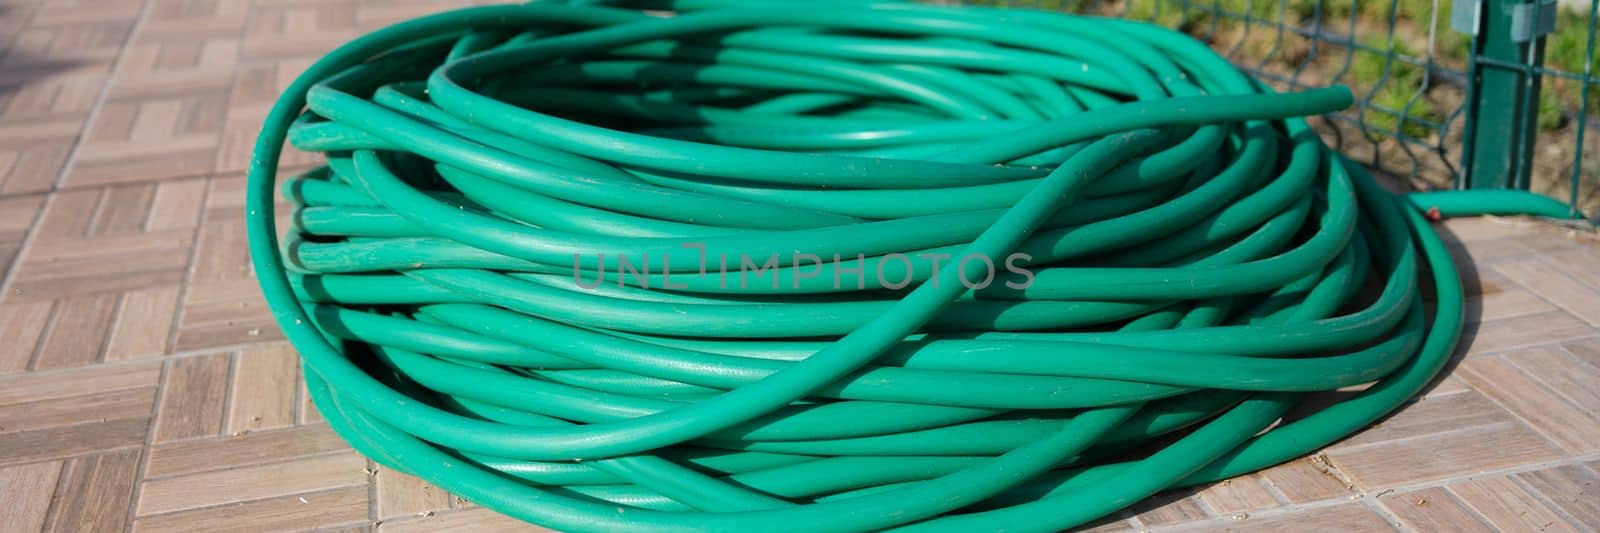 Coiled garden hose lies on ground closeup by kuprevich